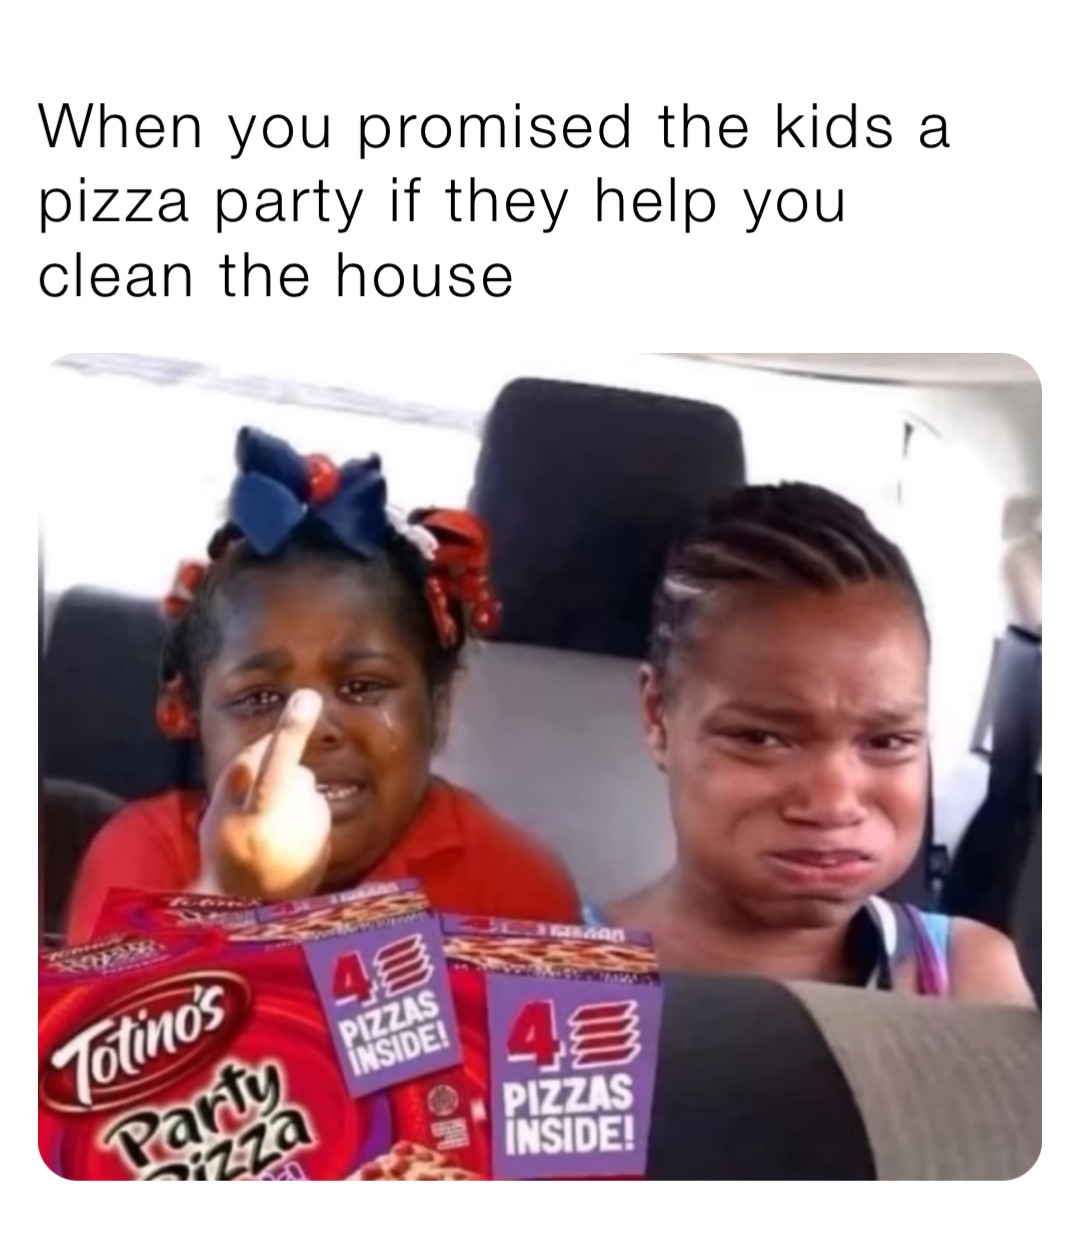 When you promised the kids a pizza party if they help you clean the house